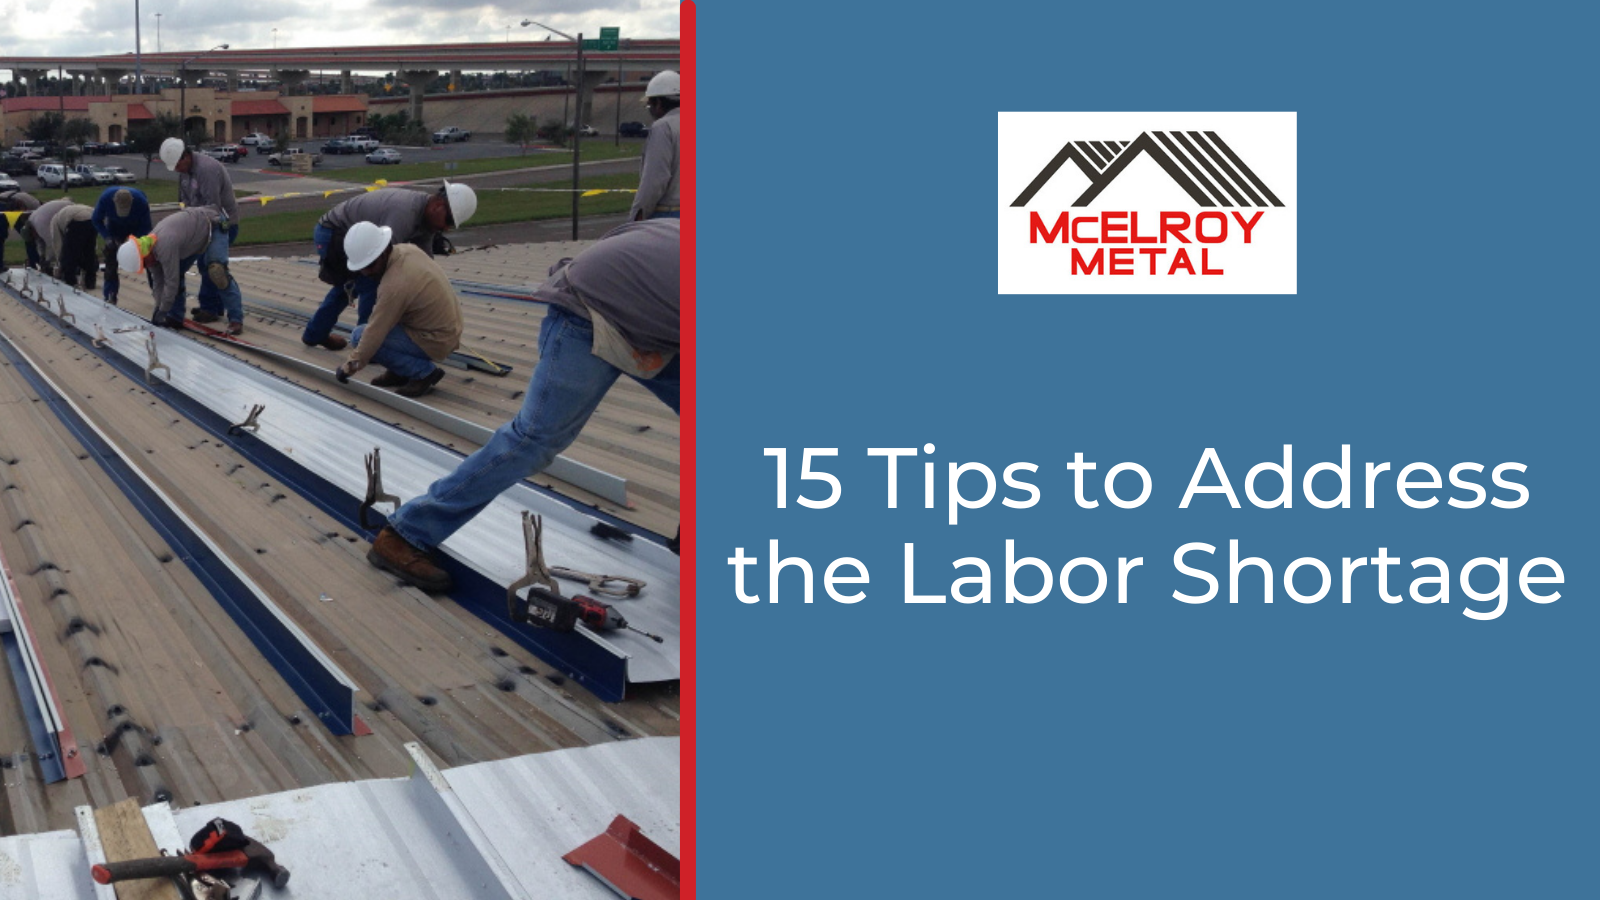 15 Tips to Address the Labor Shortage